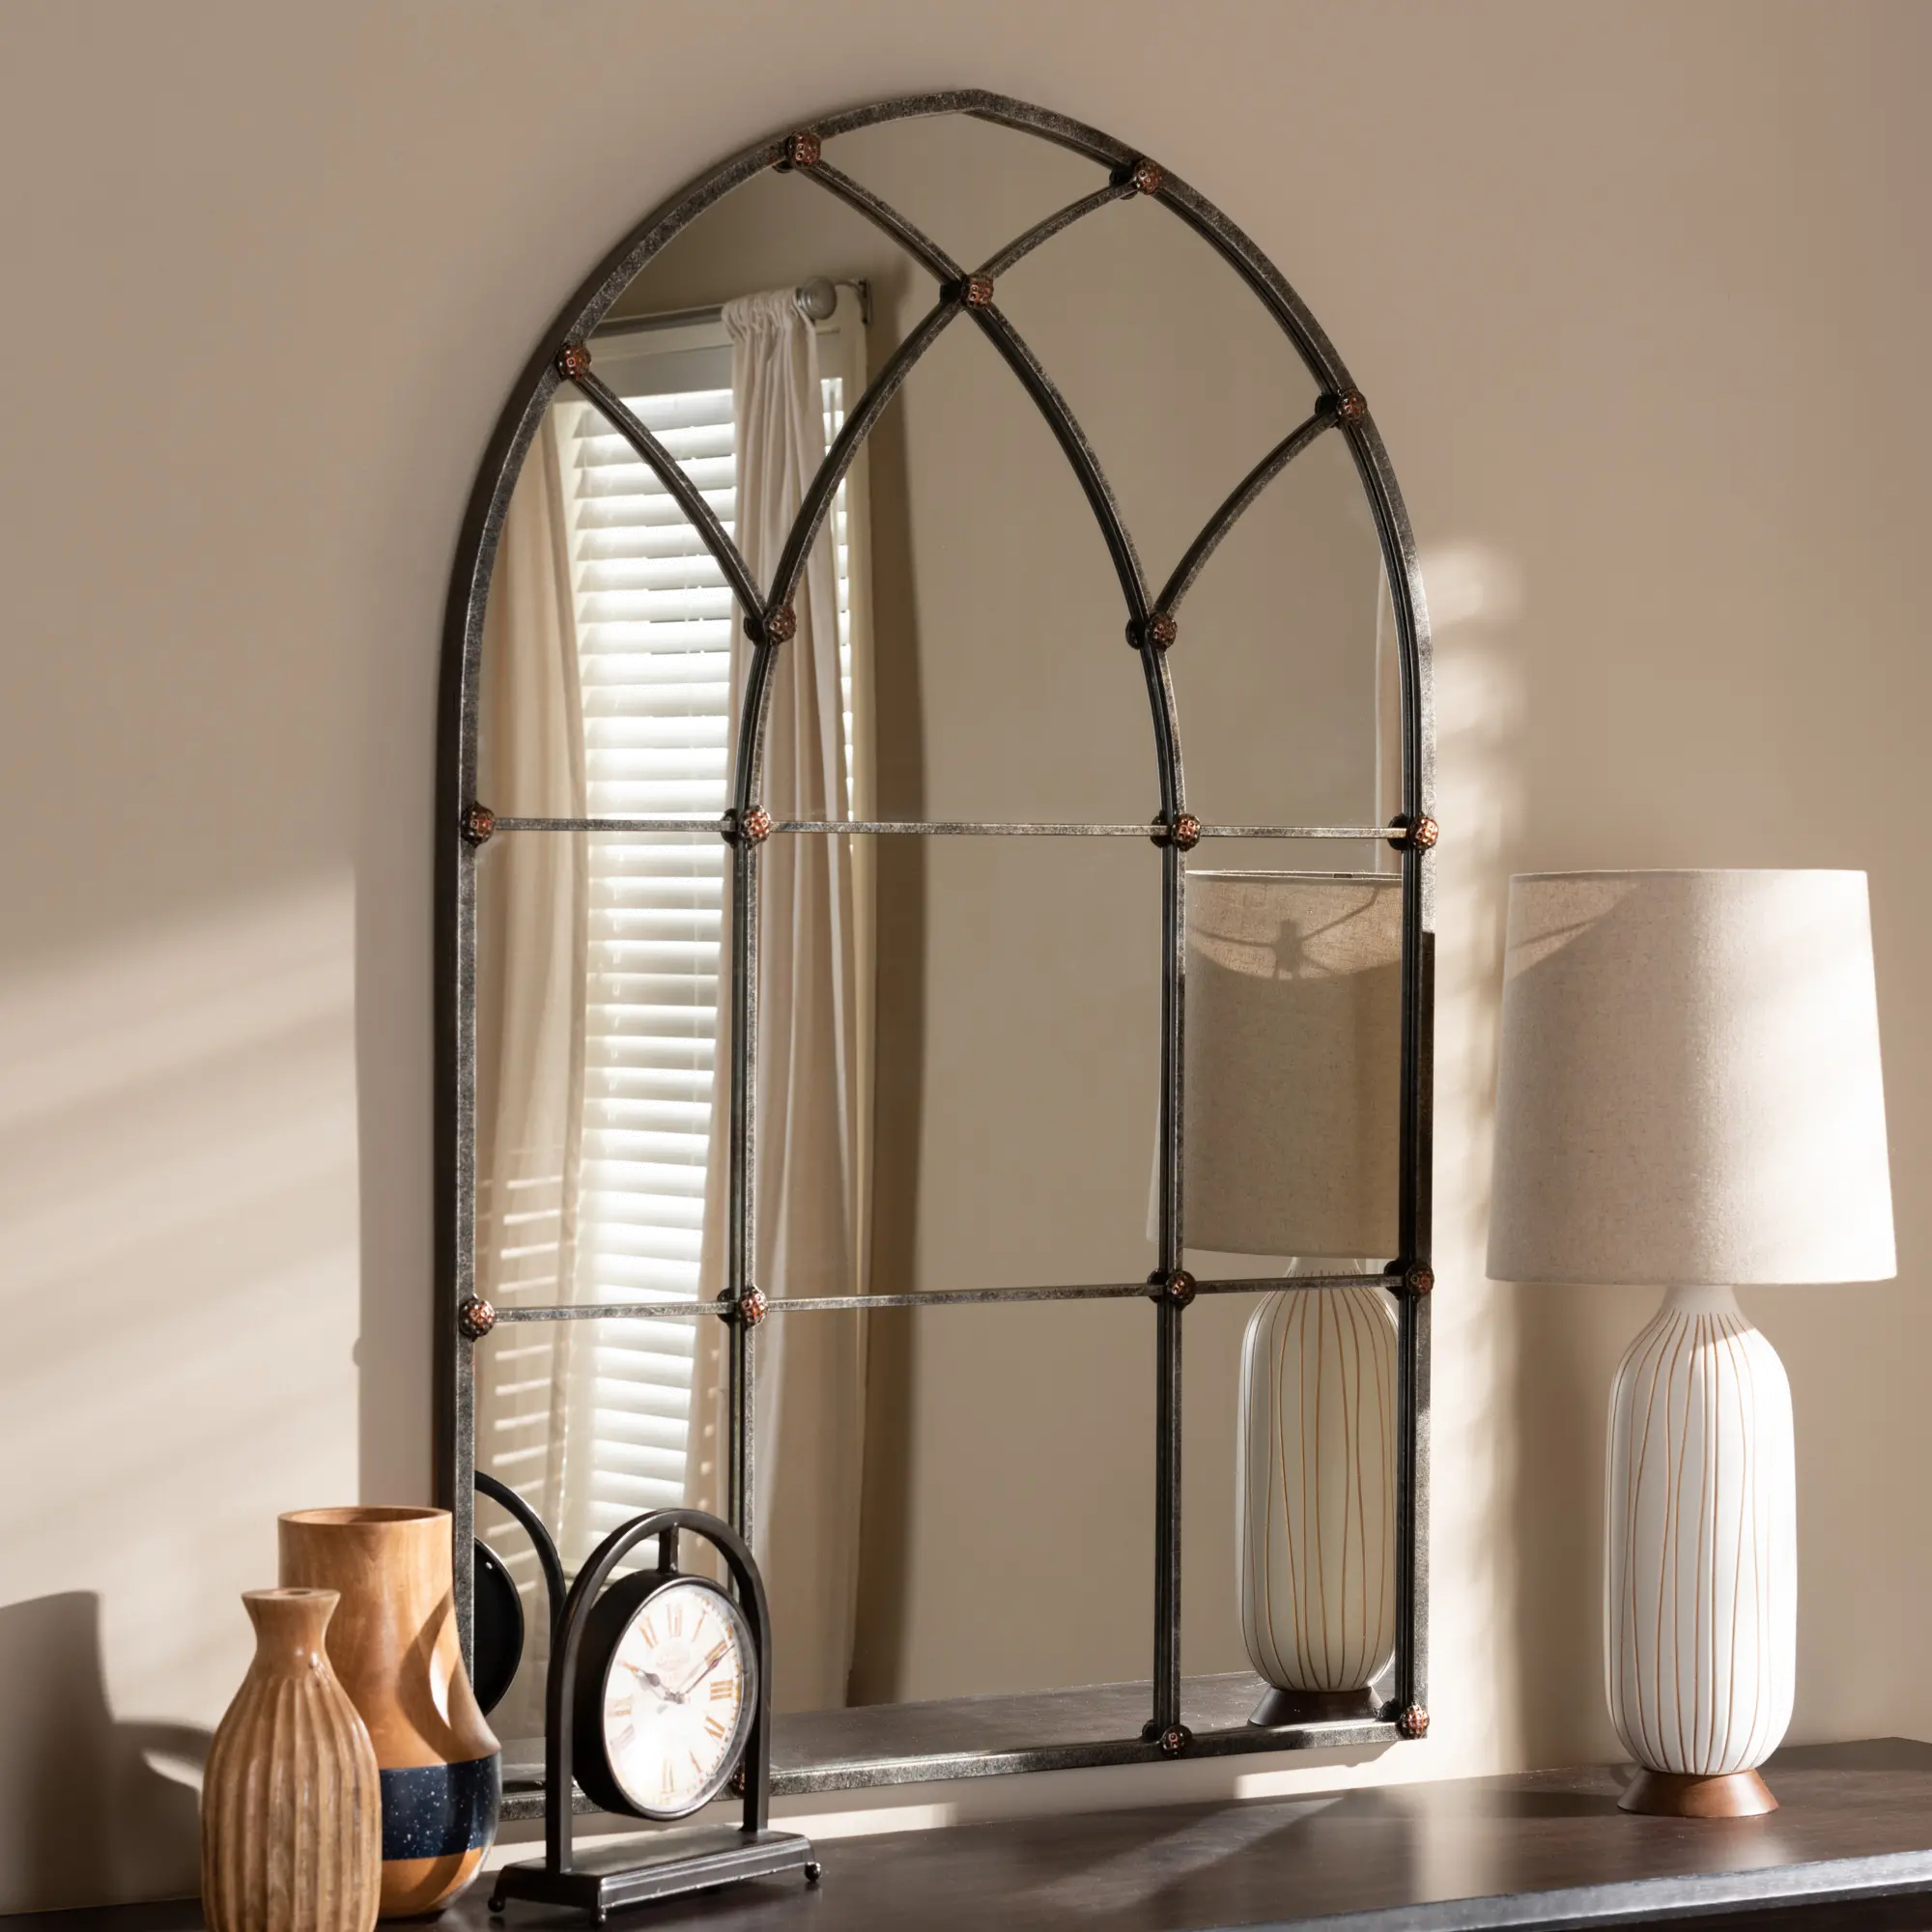 150-9054-RCW Vintage Antique Silver Arched Accent Wall Mirror - sku 150-9054-RCW